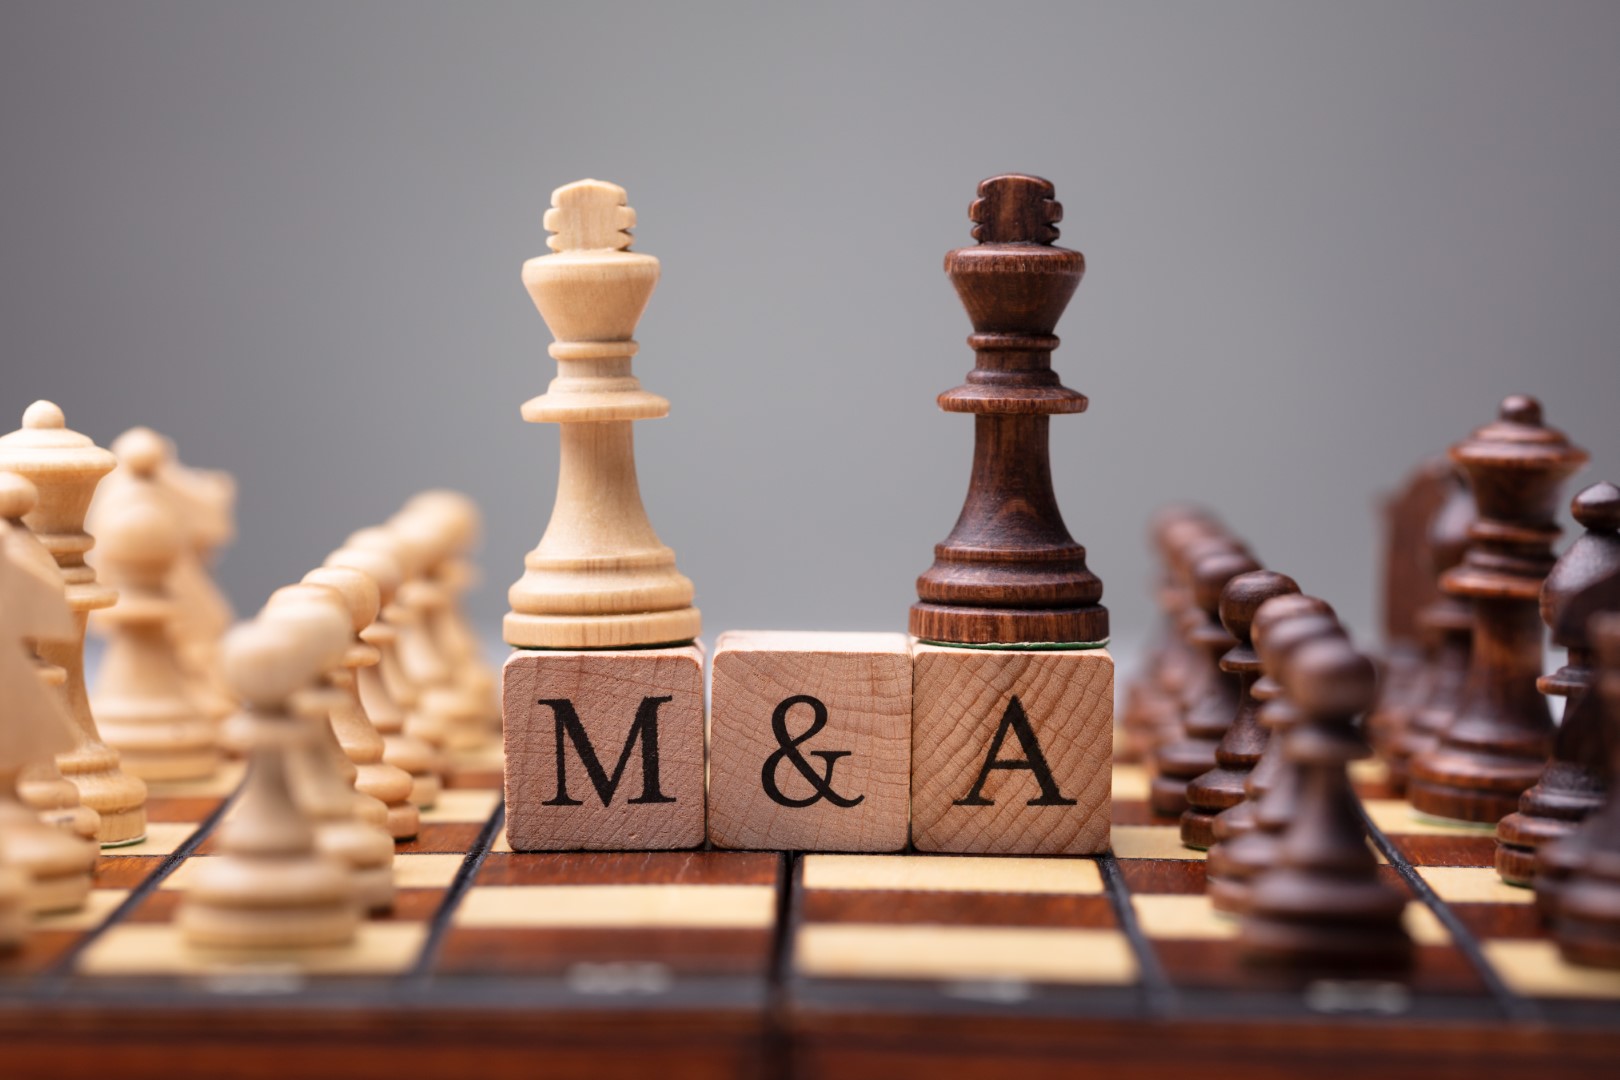 U.S. Banks: M&A Features Prominently on Q1 Calls